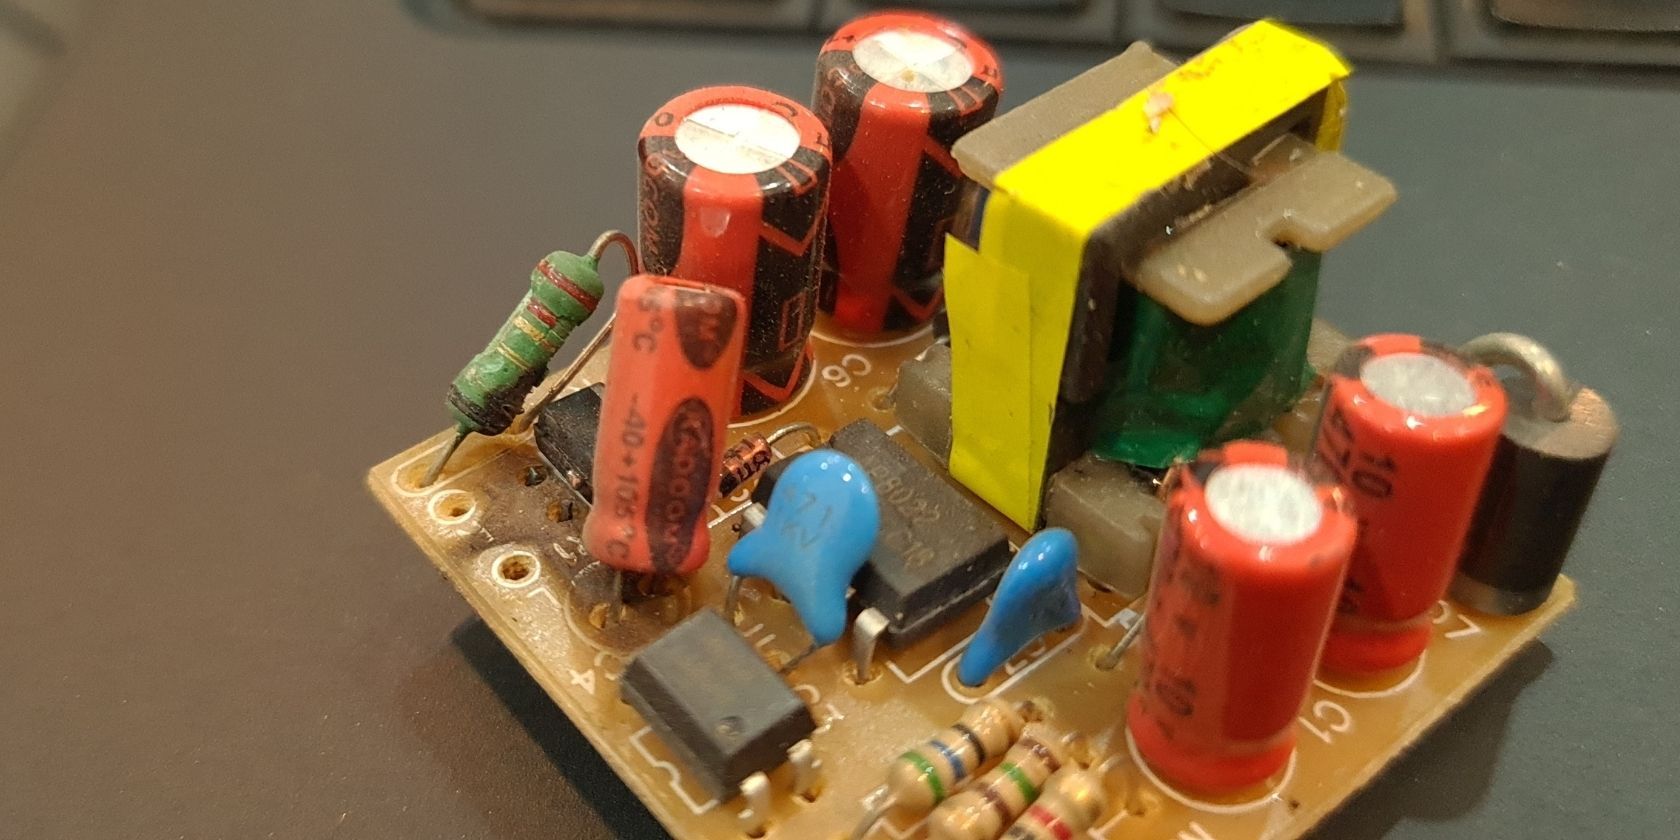 Charred or burnt resistor in power supply SMPS circuit